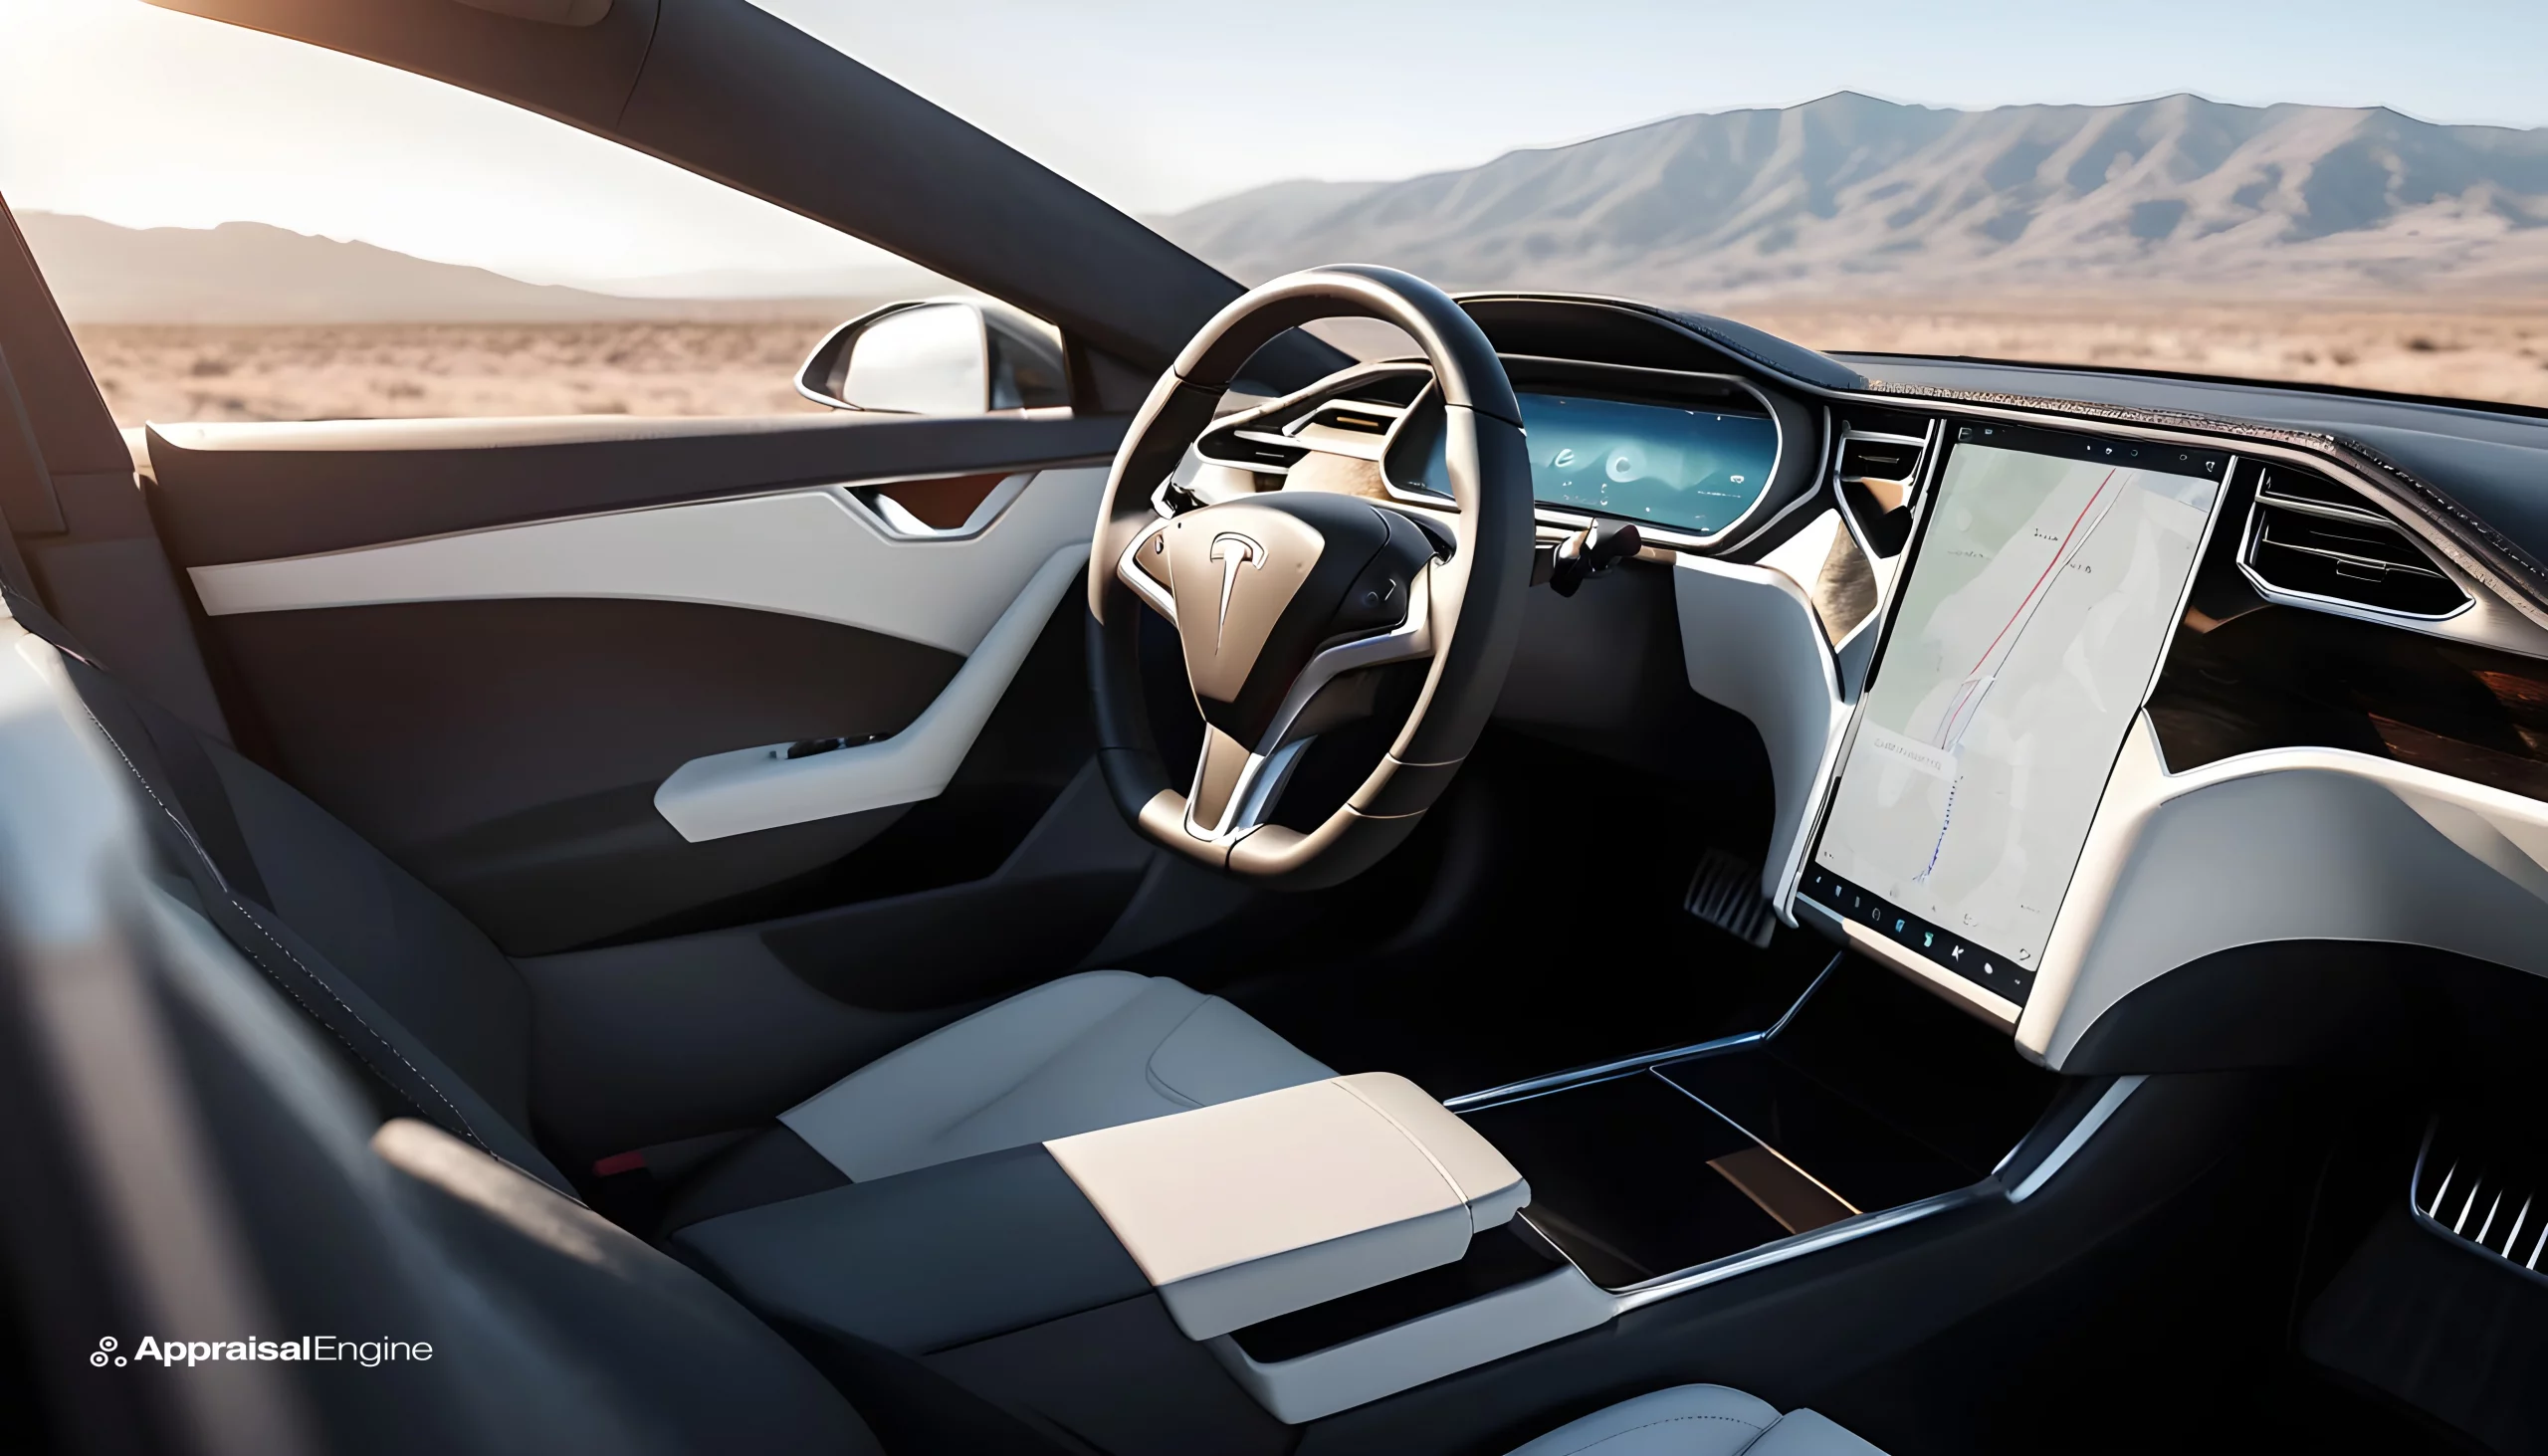 Interior view of a Tesla car showcasing the steering wheel and Autopilot interface on the central touchscreen, hinting at the blend of luxury and technology.